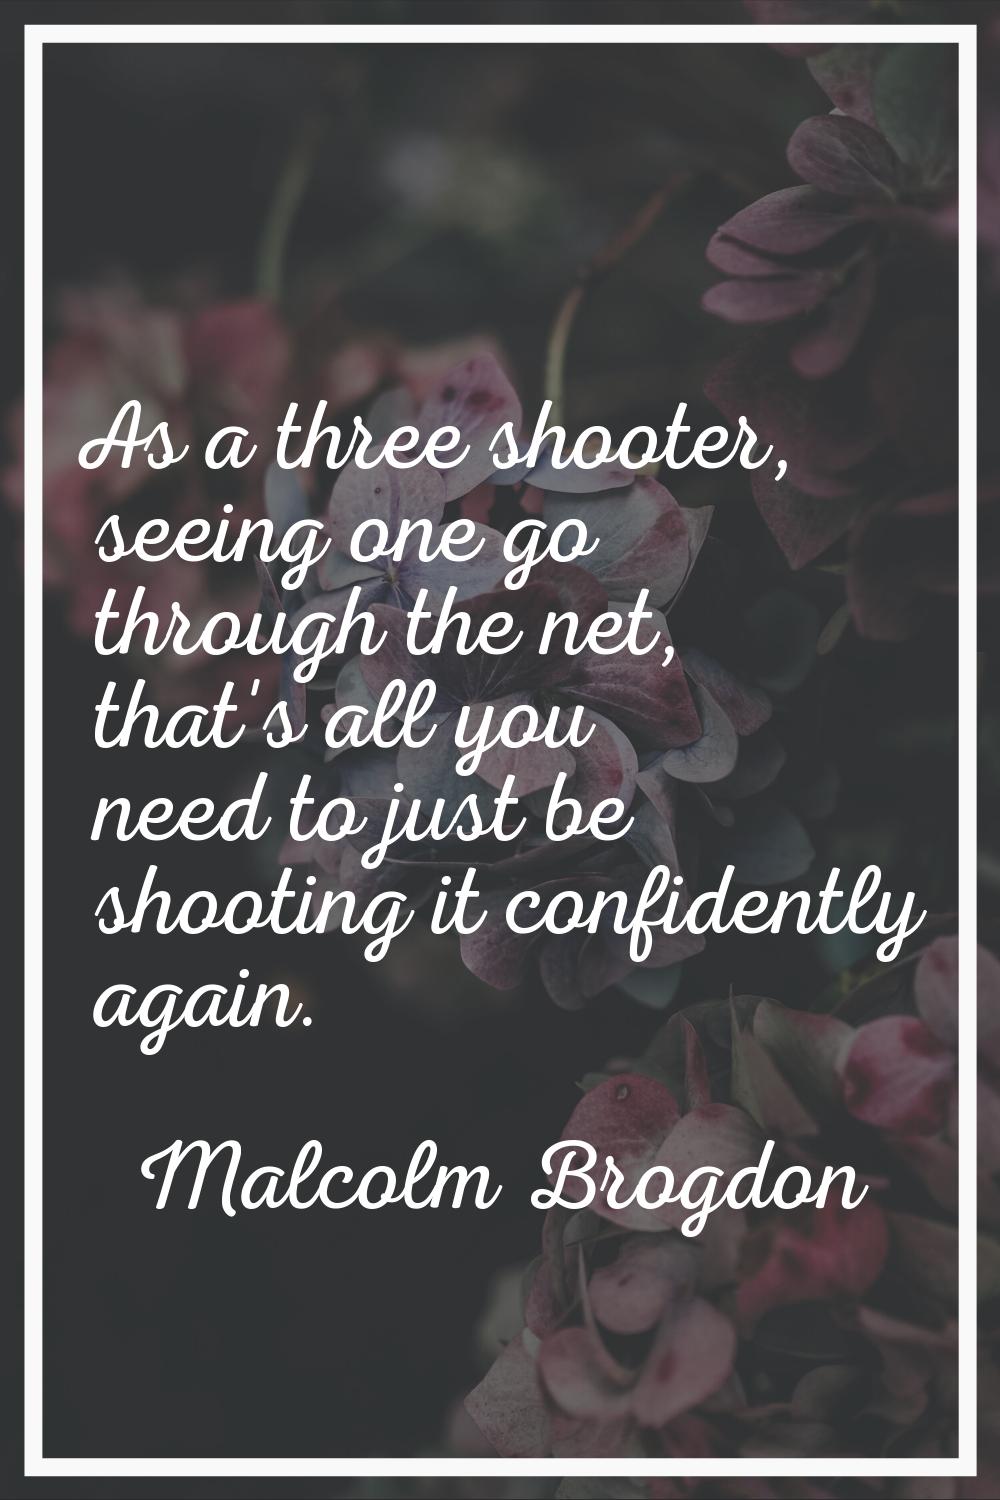 As a three shooter, seeing one go through the net, that's all you need to just be shooting it confi